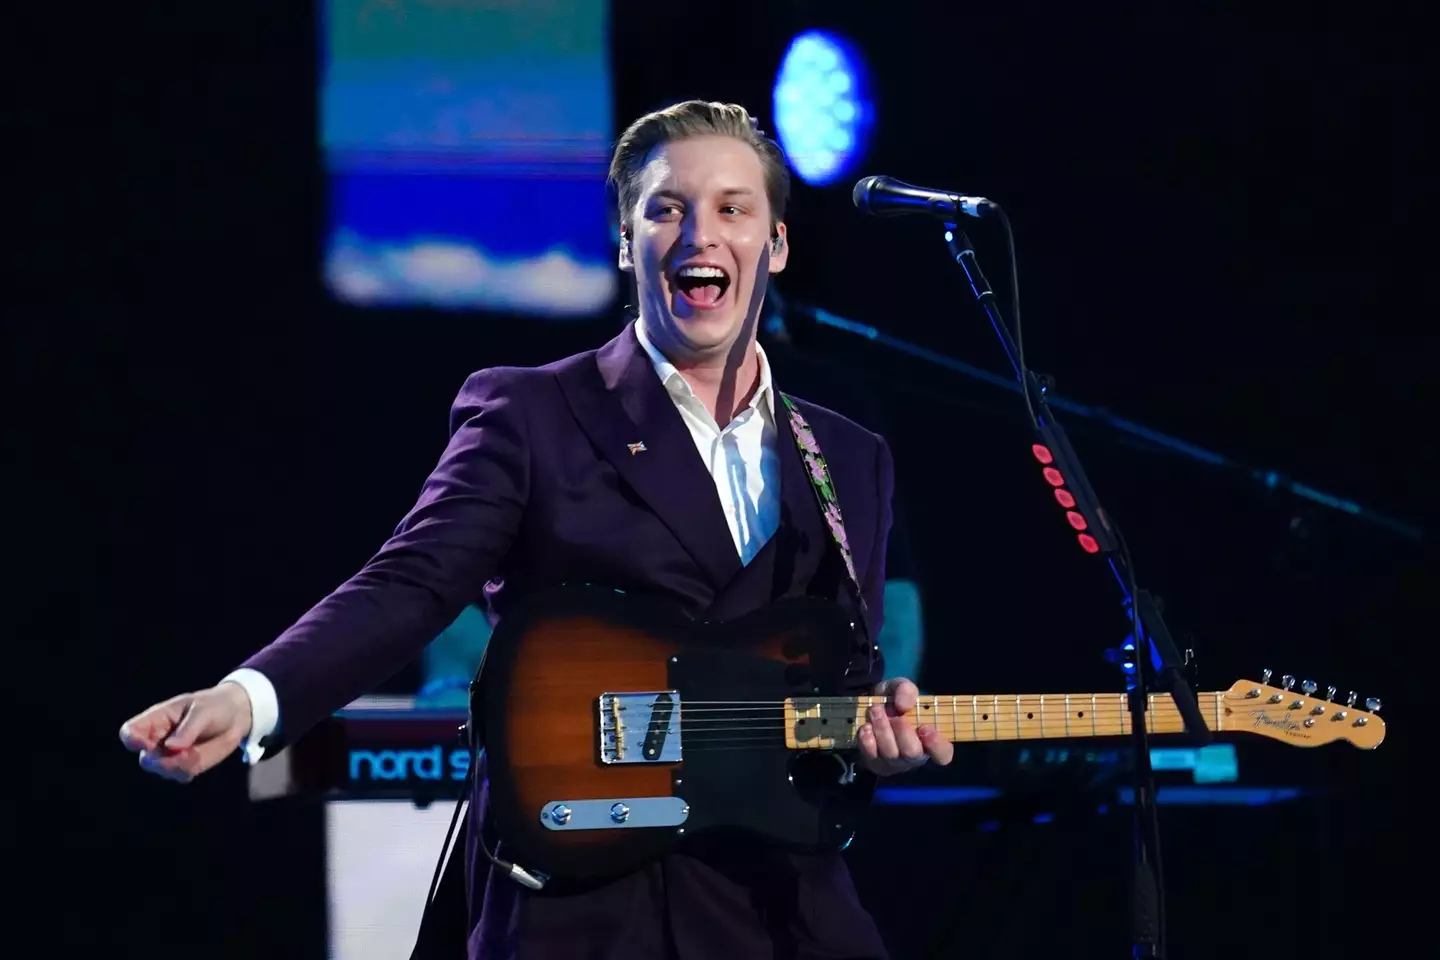 George Ezra noted how 'surreal' the experience was.